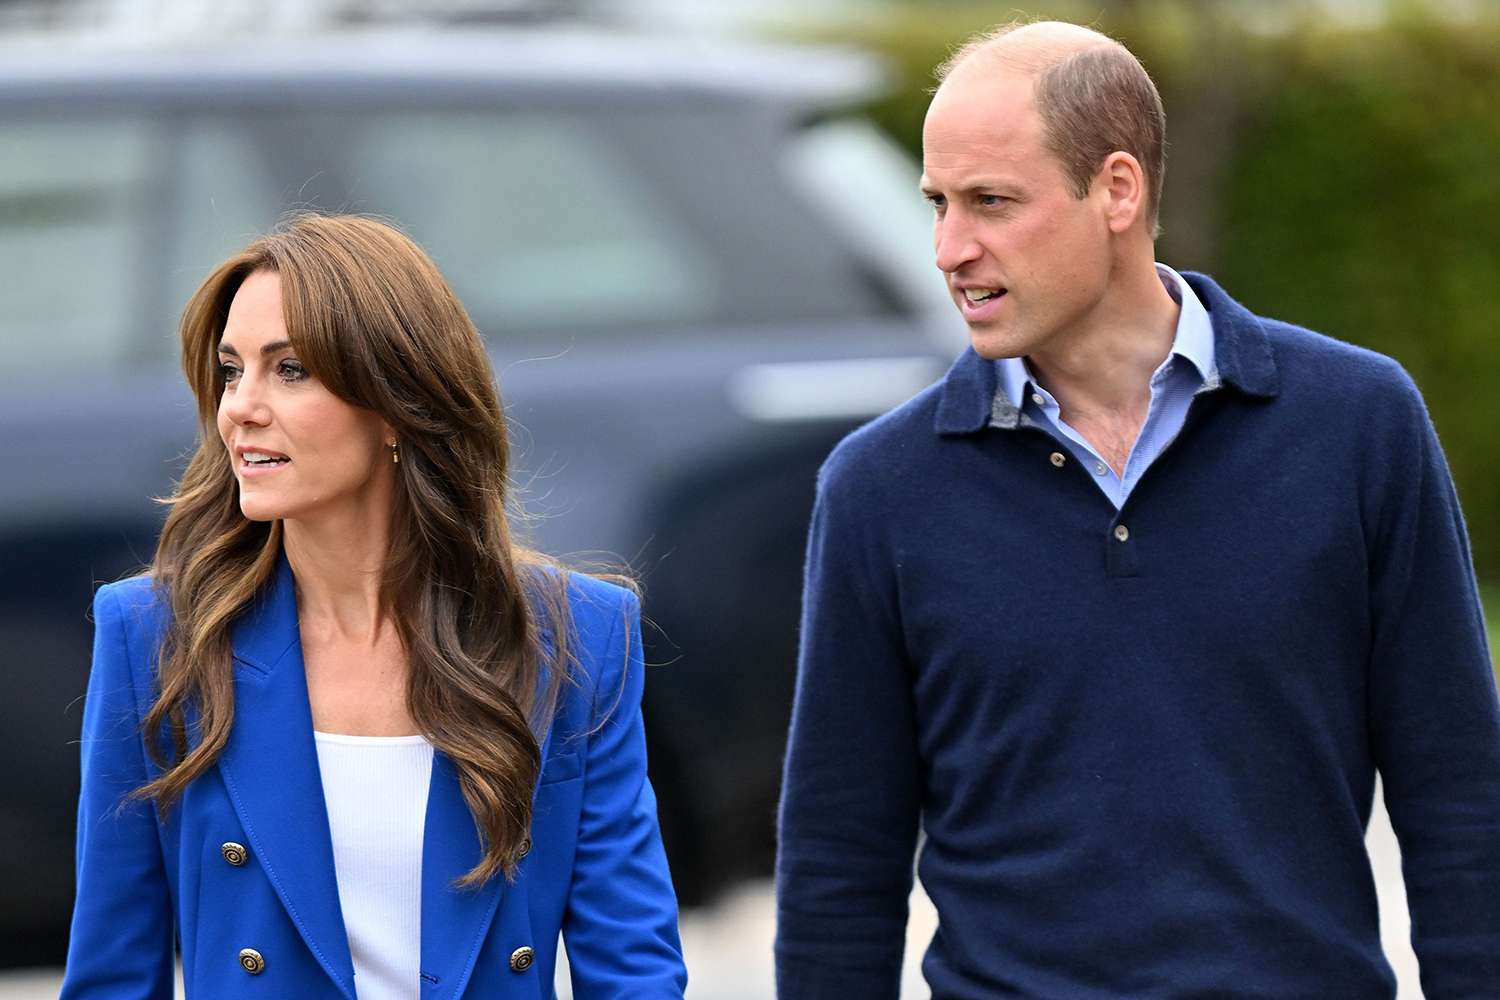 Prince William Asked If Kate Middleton Is ‘Getting Better’ amid Cancer [Video]